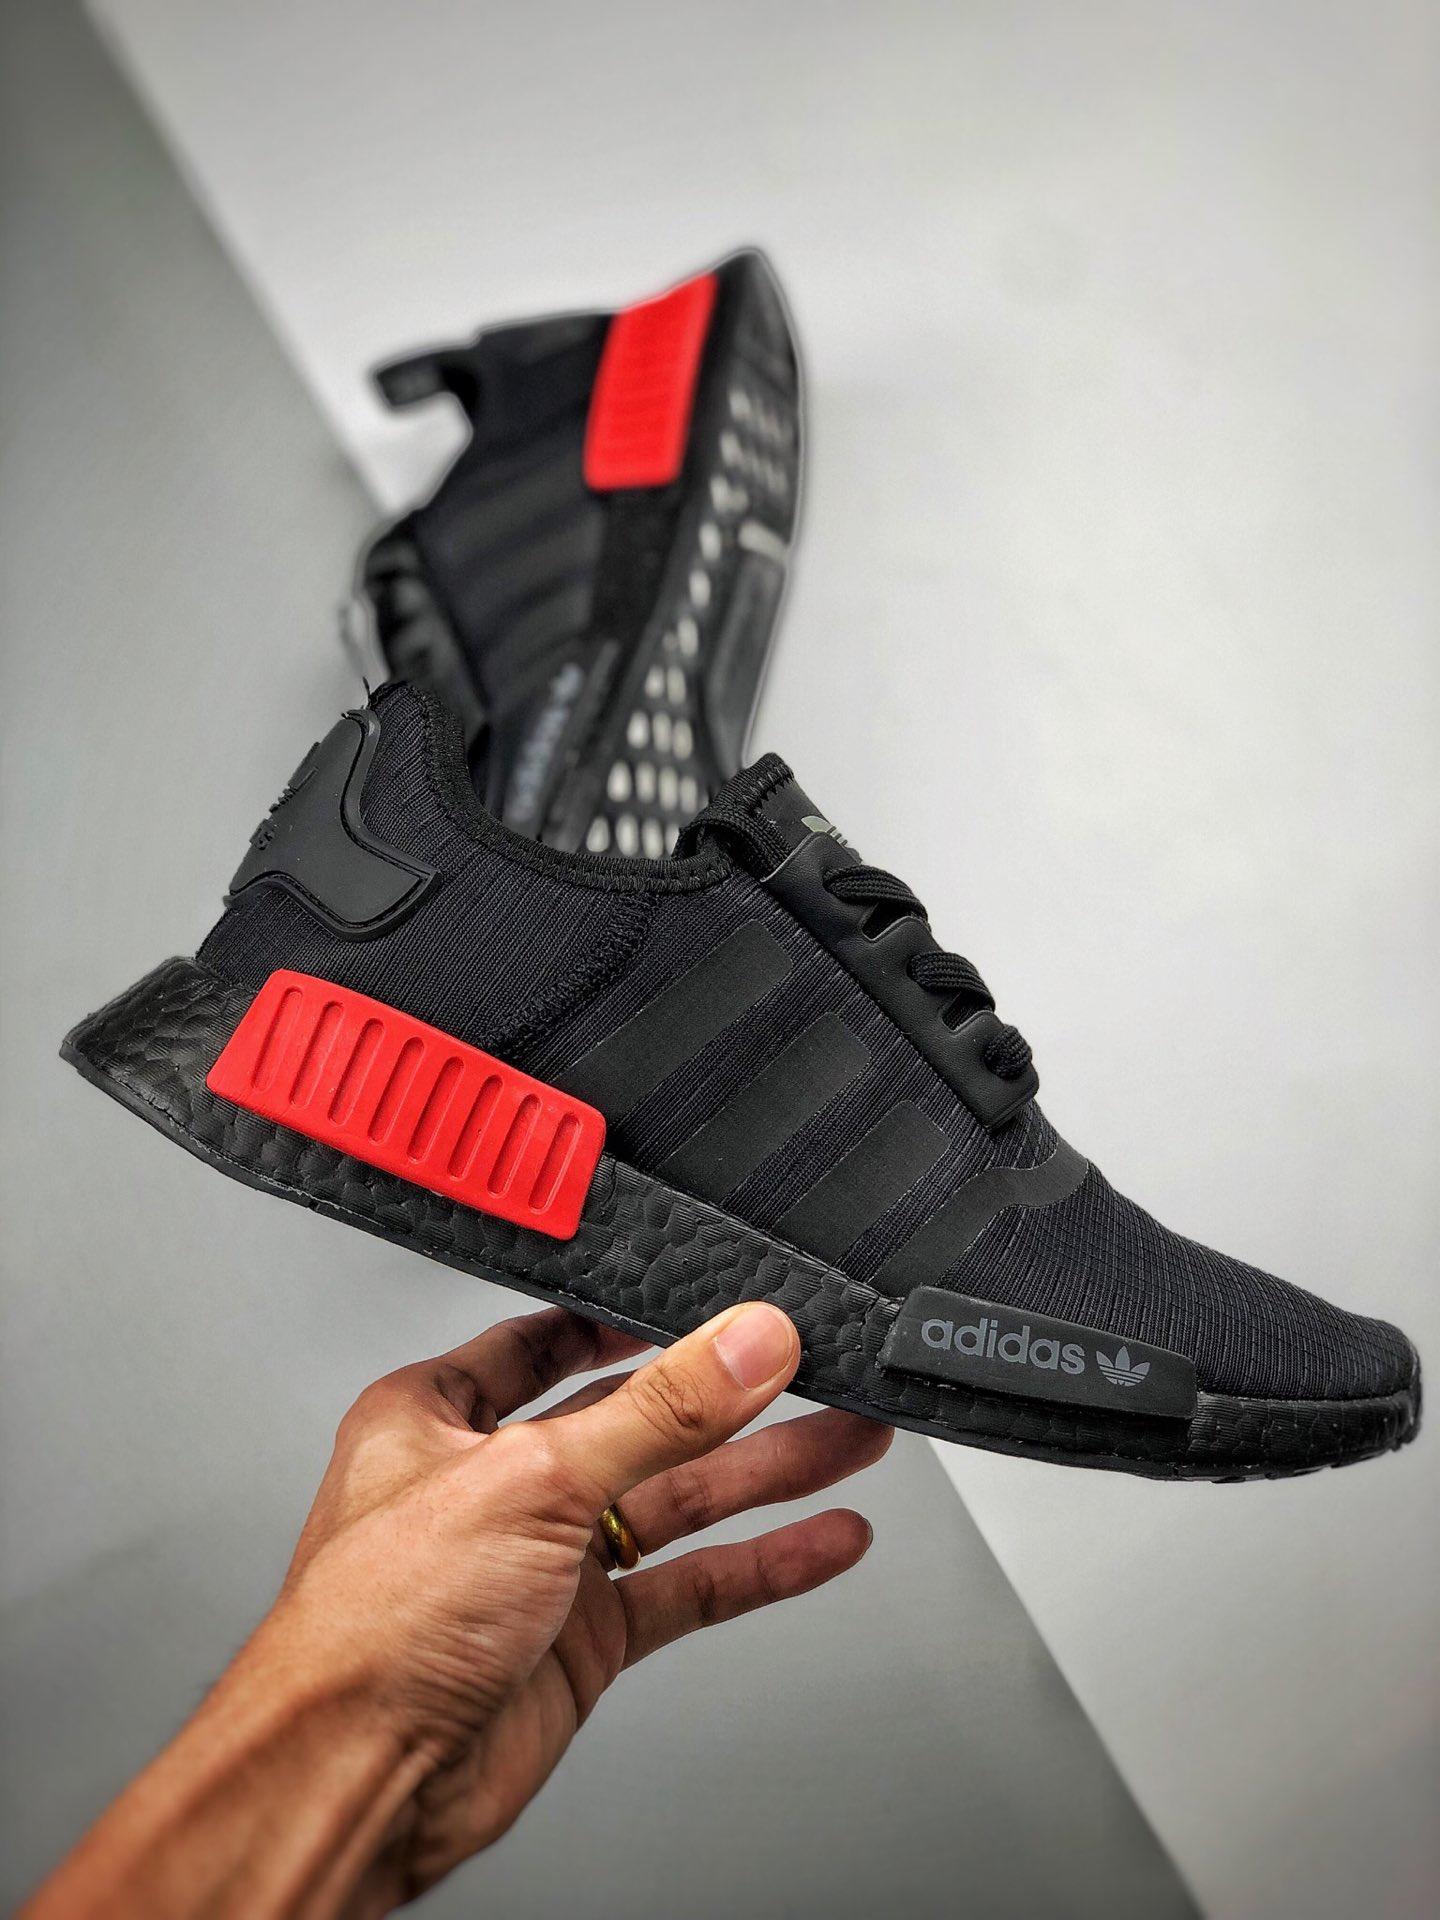 adidas NMD R1 Black/Lush Red B37618 For Sale – Sneaker Hello